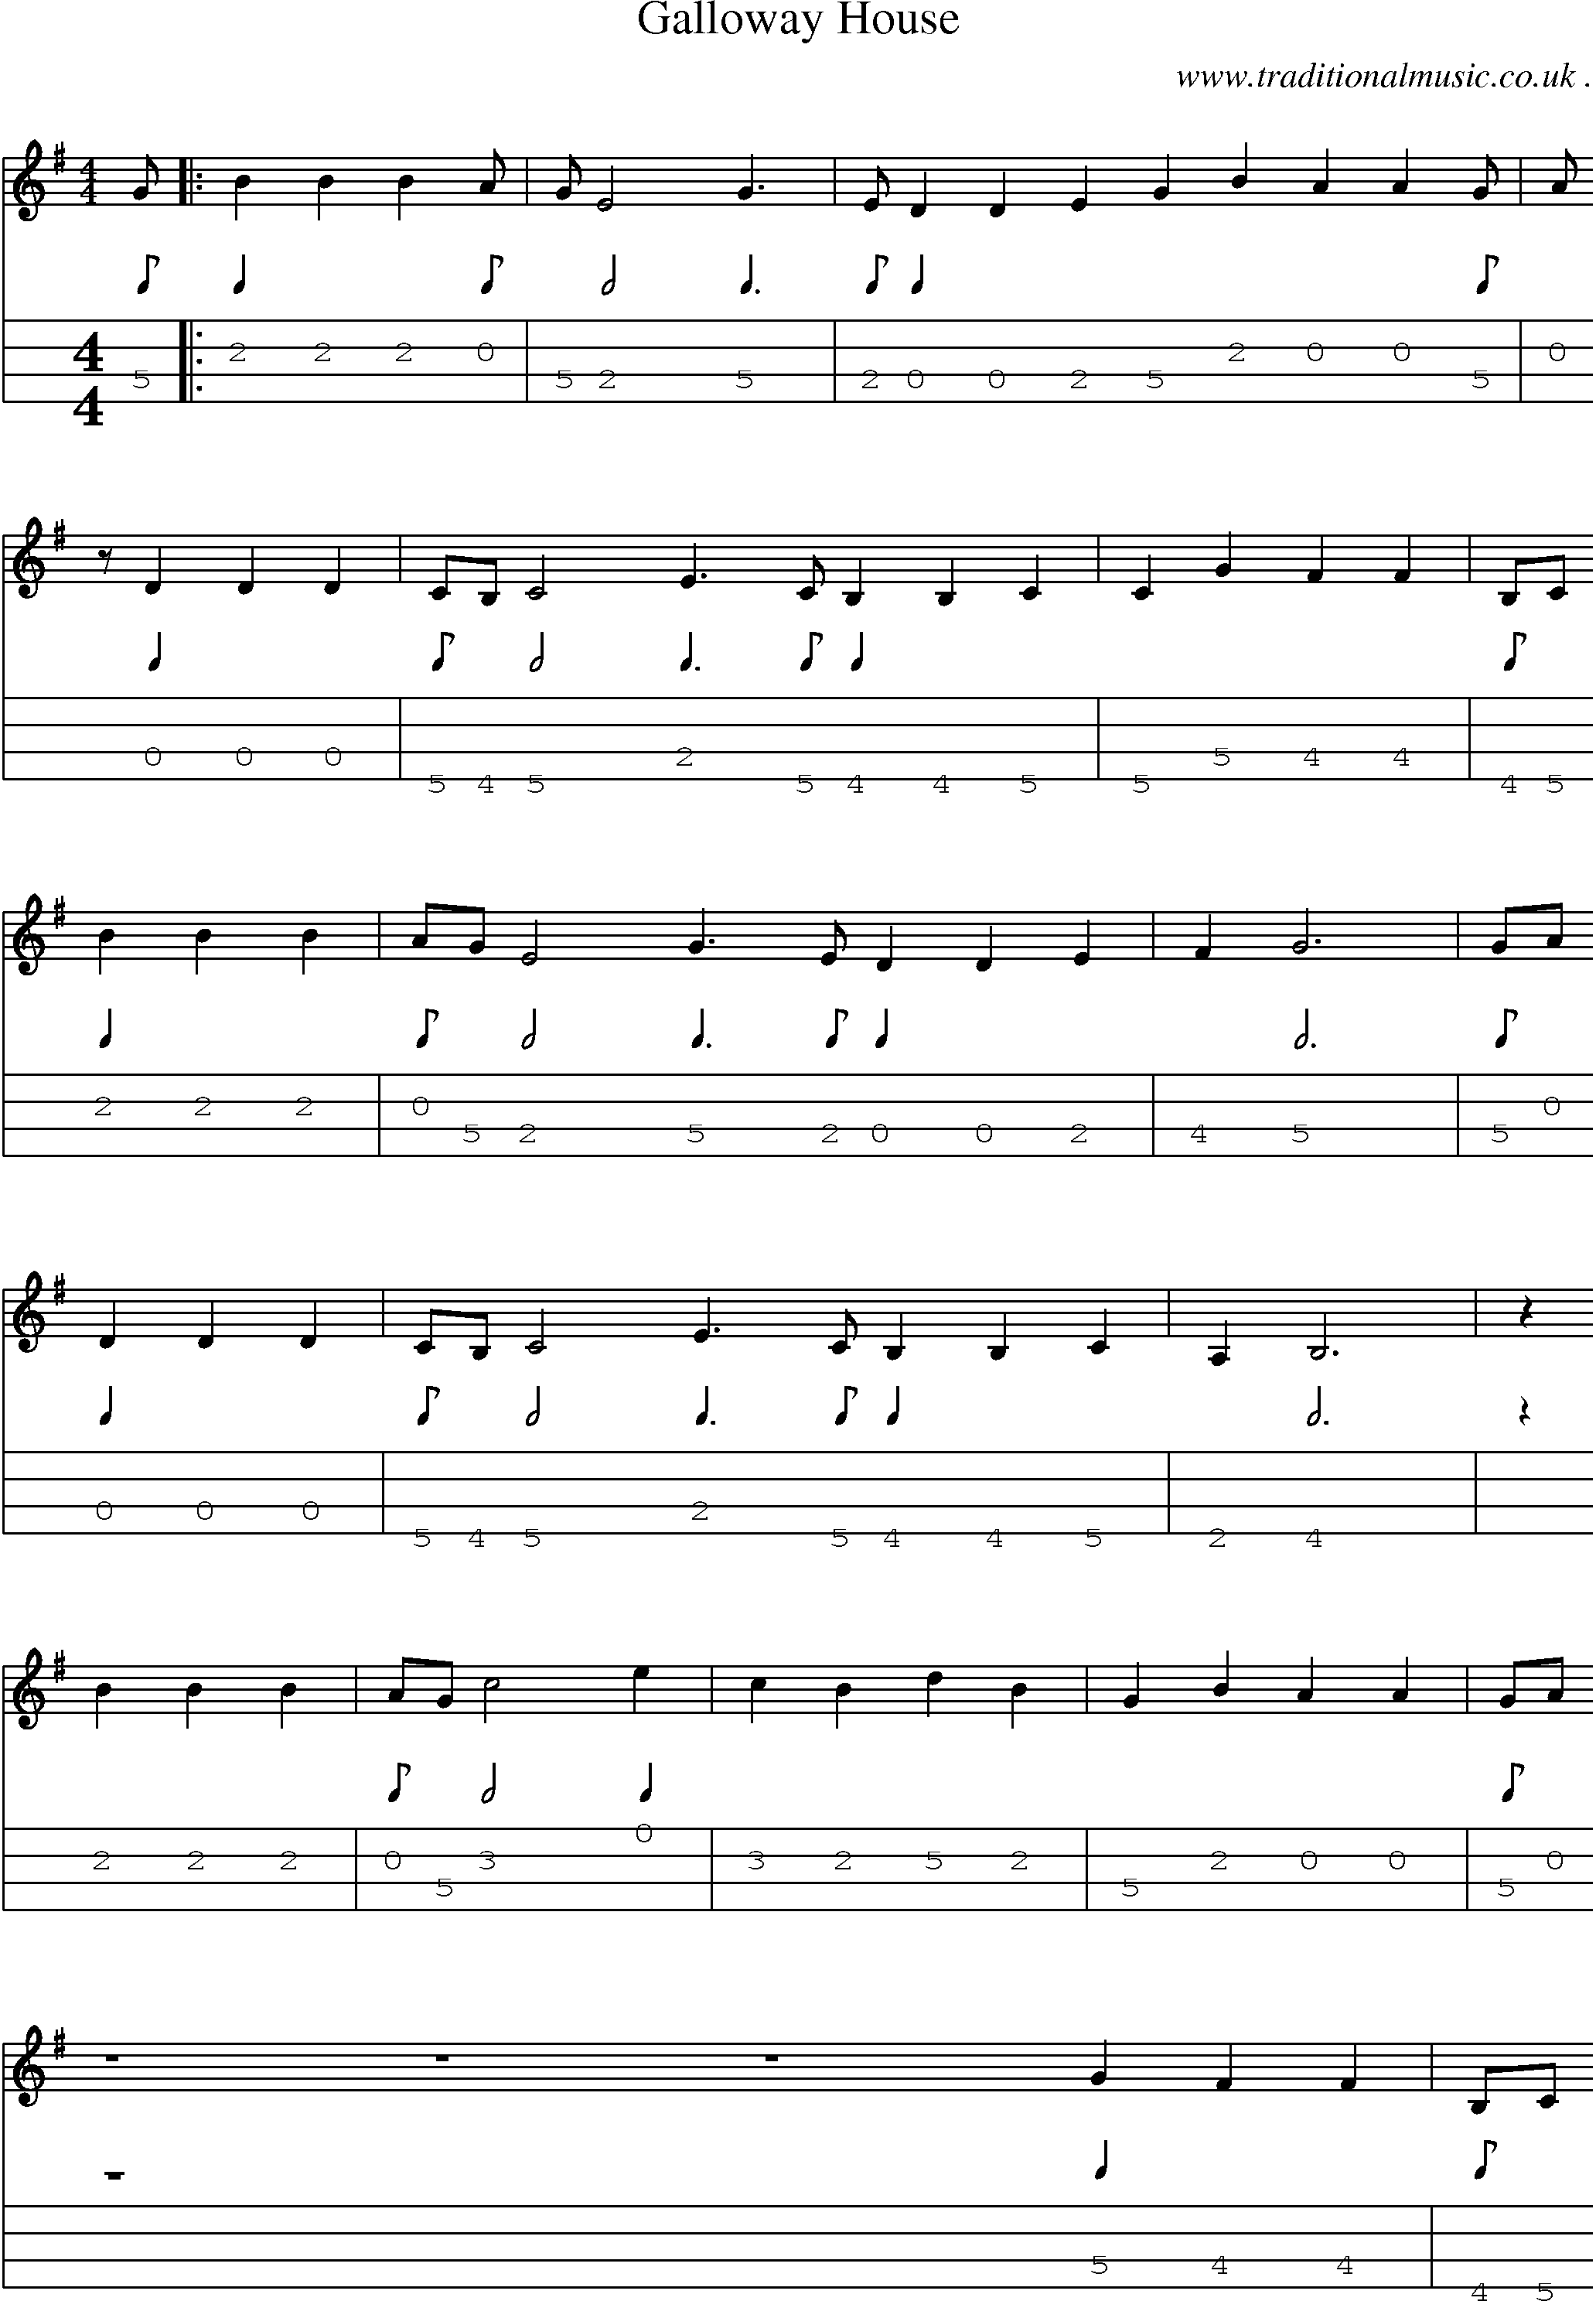 Sheet-Music and Mandolin Tabs for Galloway House